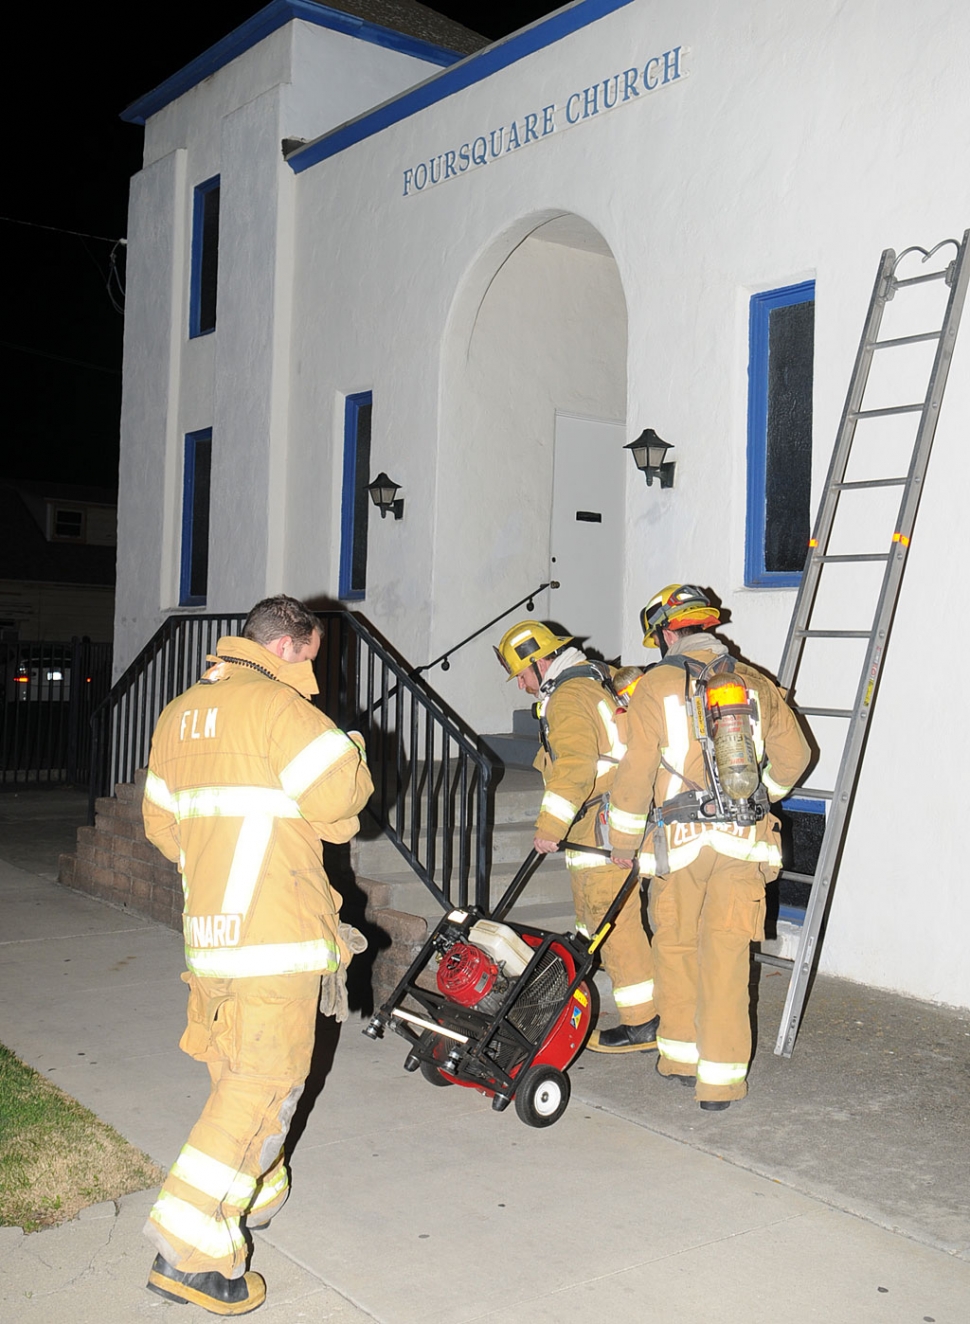 Fillmore Fire Department responded to an incident at the Fillmore Foursquare Church Friday, November 23 at approximately 10:15pm. An overhead light ballast began to smoke, setting off the smoke alarm. No fire was present, no damage to property.